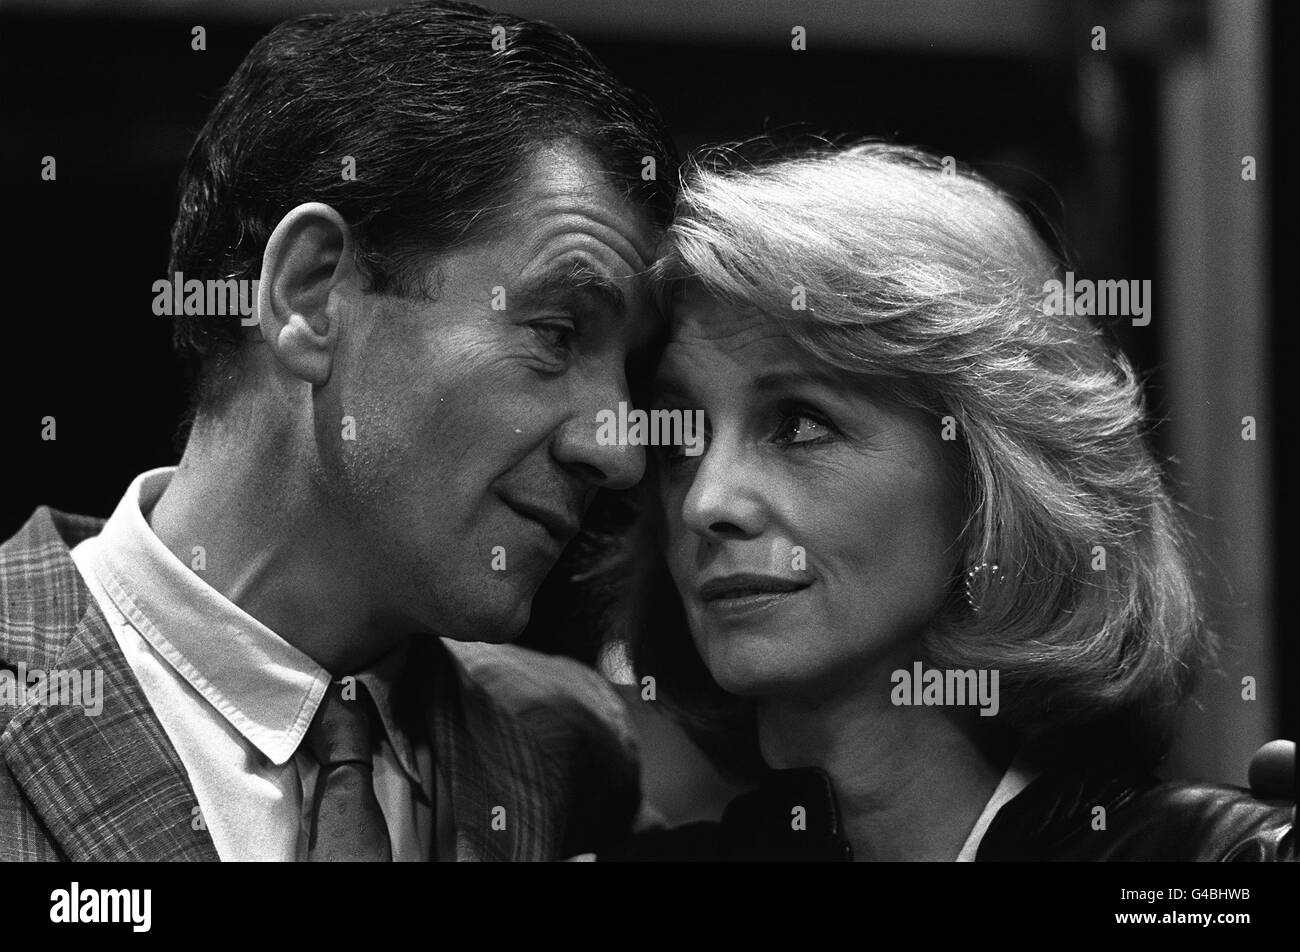 PA NEWS PHOTO 18/11/88 ACTOR IAN McKellen AND JANE ASHER IN REHEARSALS FOR THE ALAN AYCKBOURN PLAY 'HENCEFORWARD' AT THE VAUDEVILLE THEATRE IN LONDON'S WEST END Stock Photo